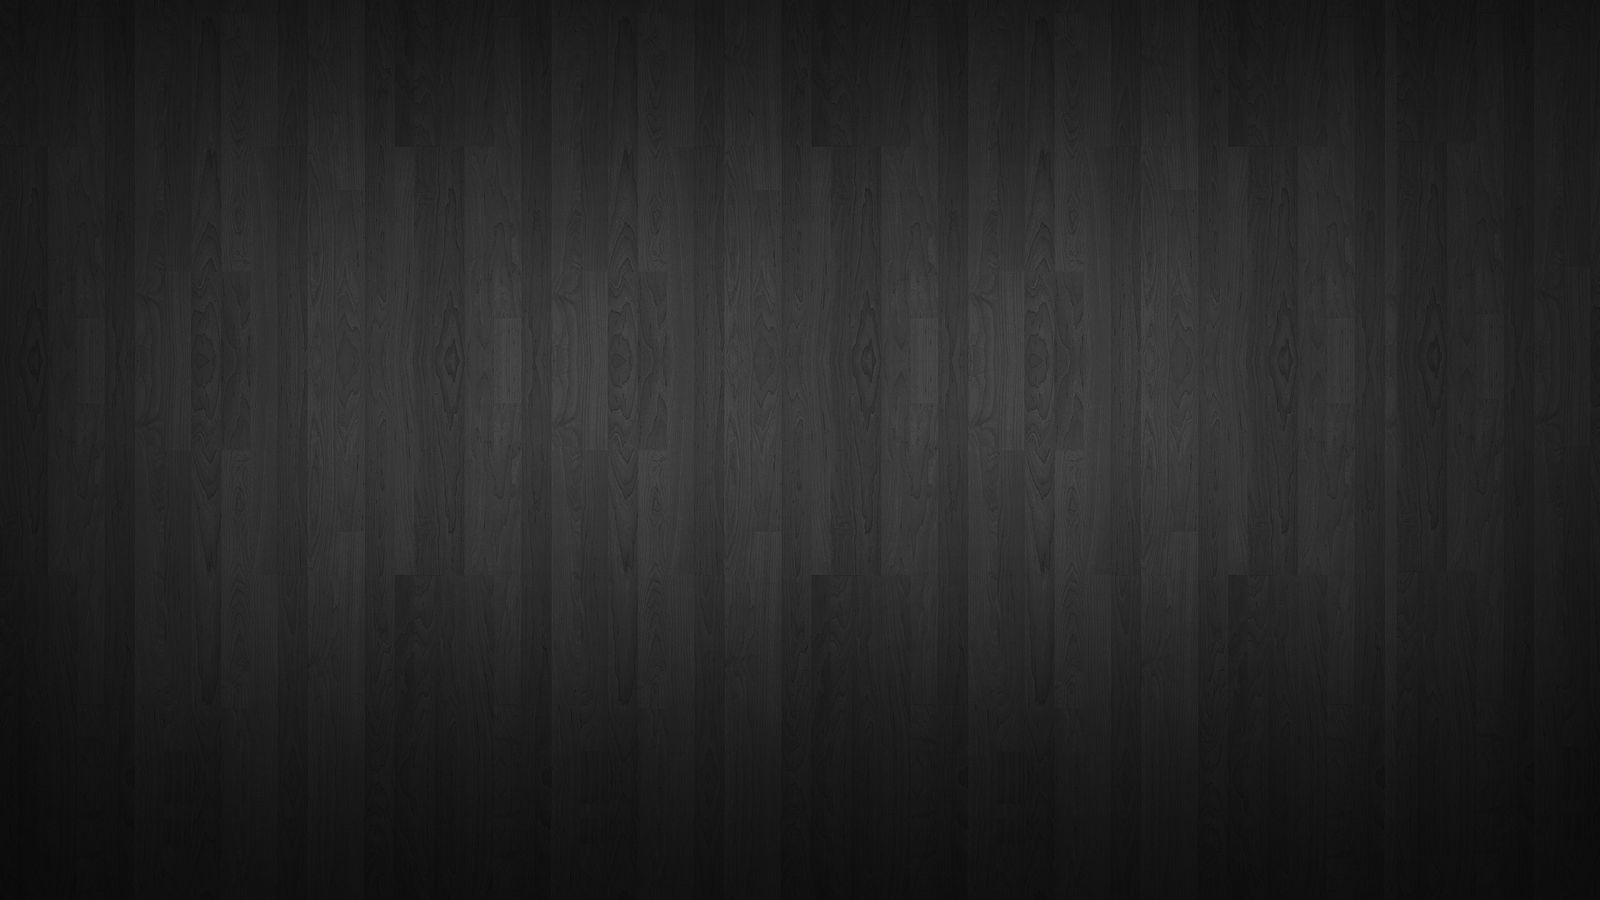 Download wallpaper 1600x900 background, black white, wooden, surface, board  widescreen 16:9 hd background